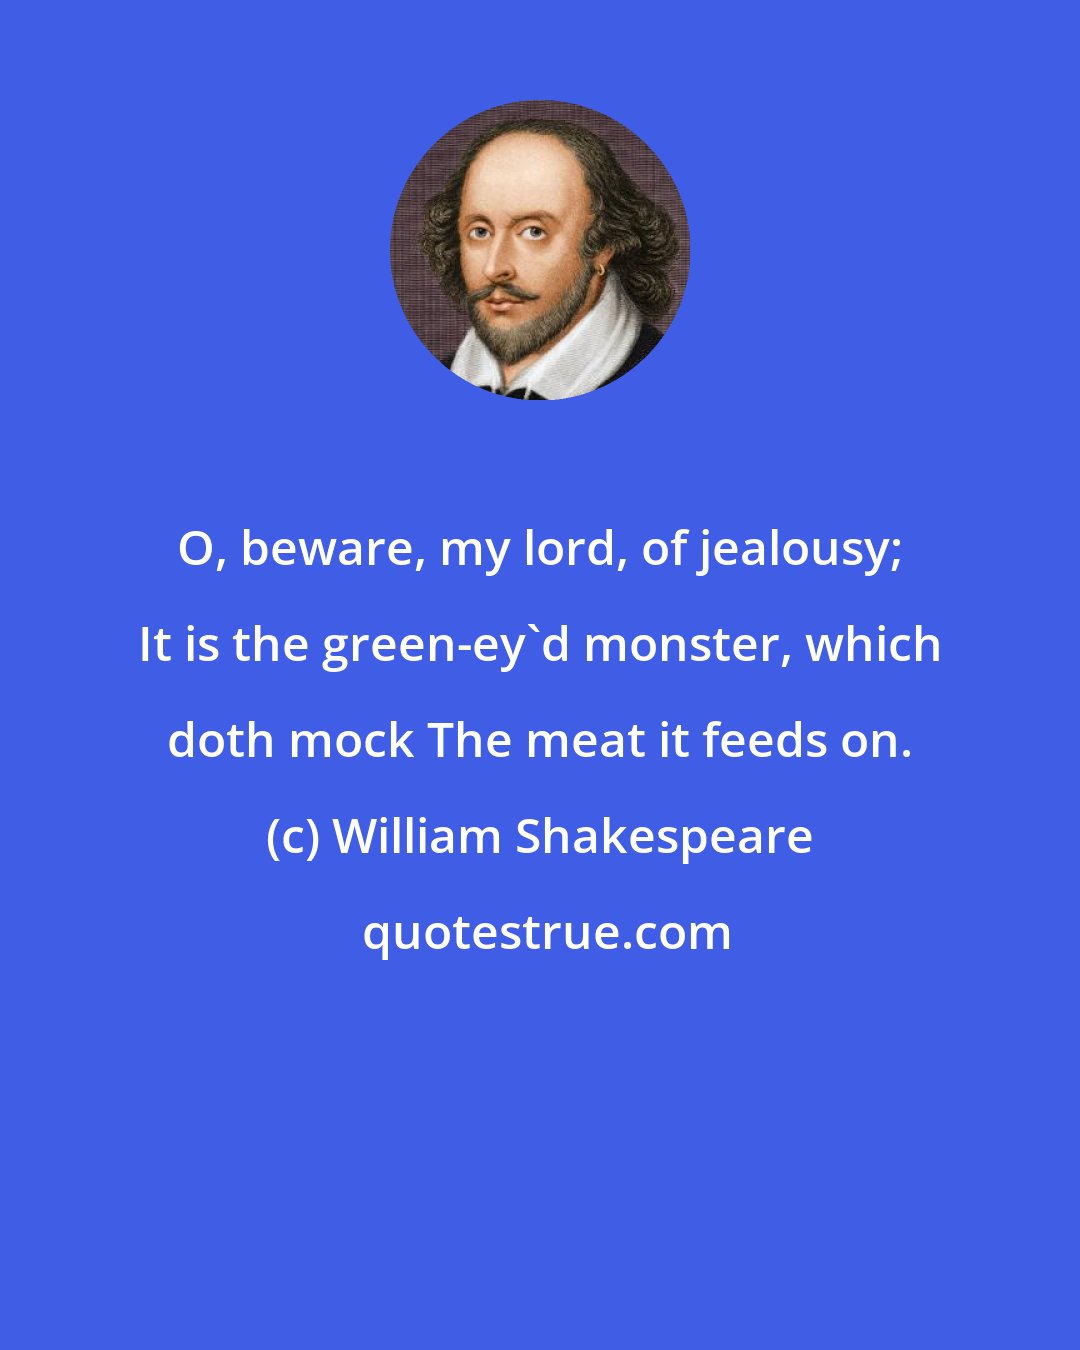 William Shakespeare: O, beware, my lord, of jealousy; It is the green-ey'd monster, which doth mock The meat it feeds on.